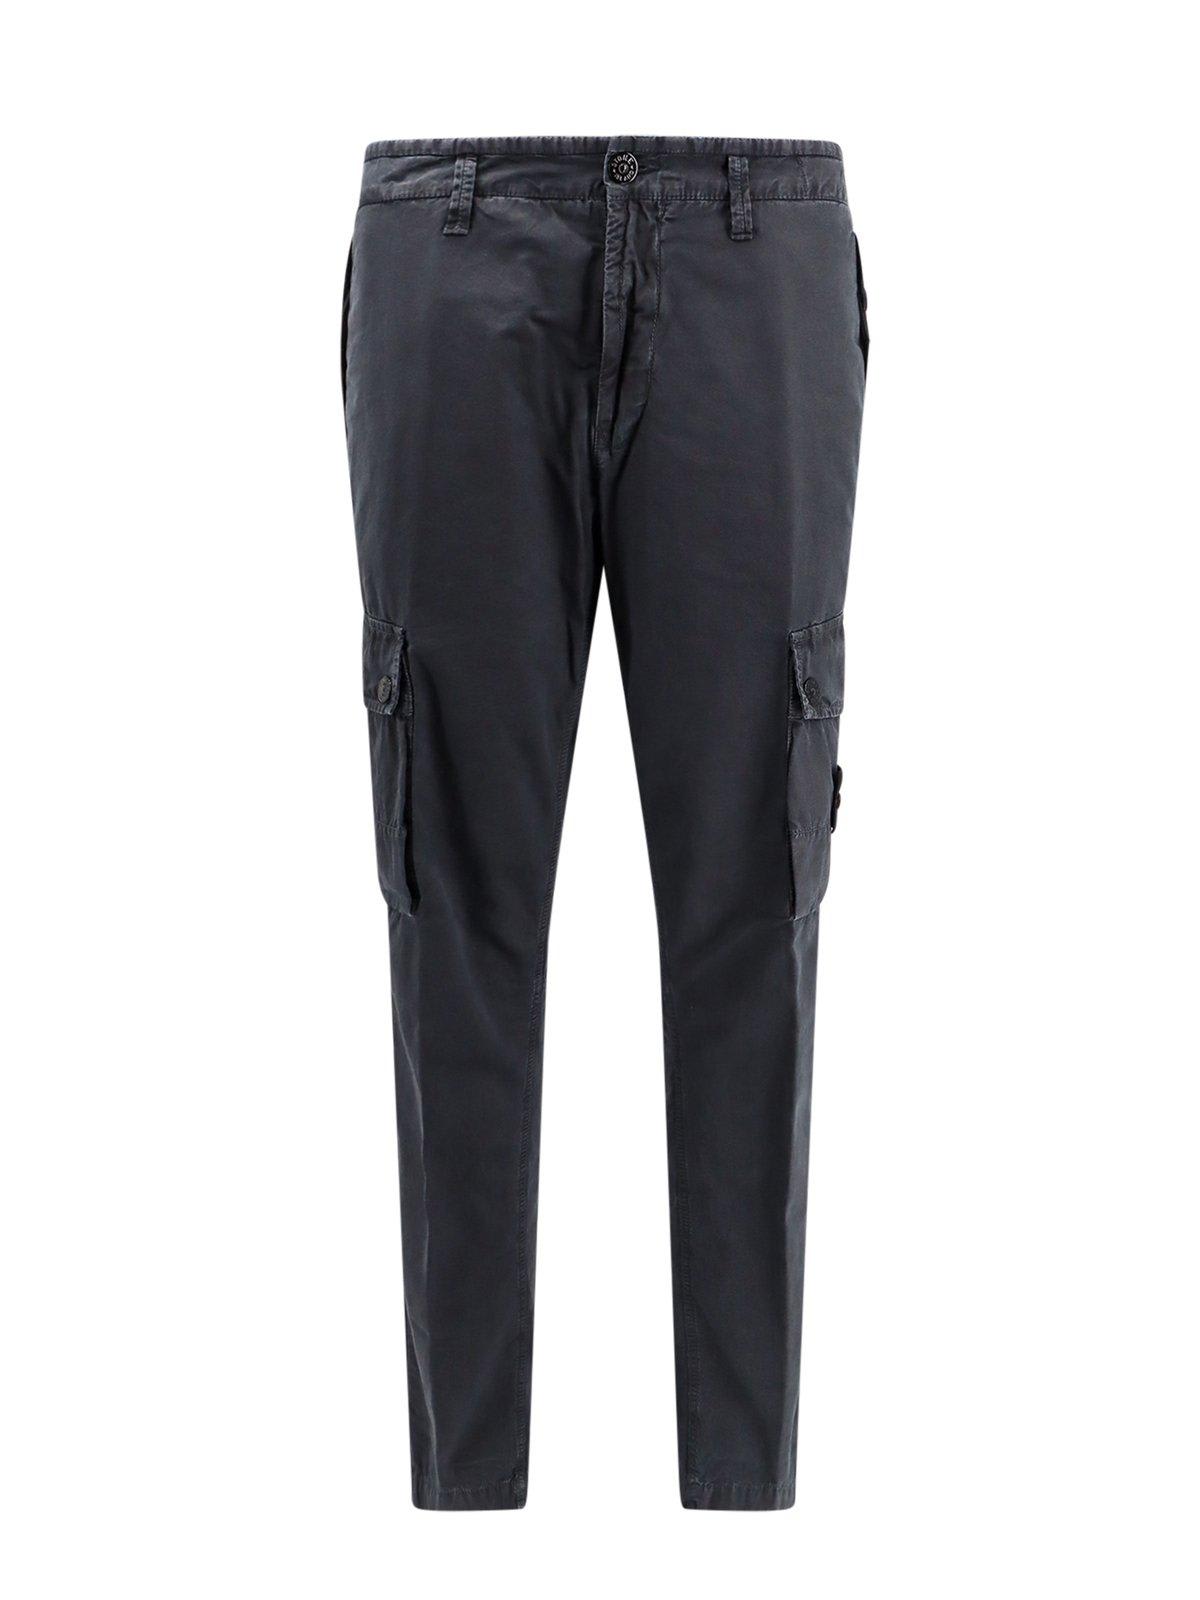 Buy BLEND Navy Solid Slim Fit Cargo Trousers - Trousers for Men 1721242 |  Myntra